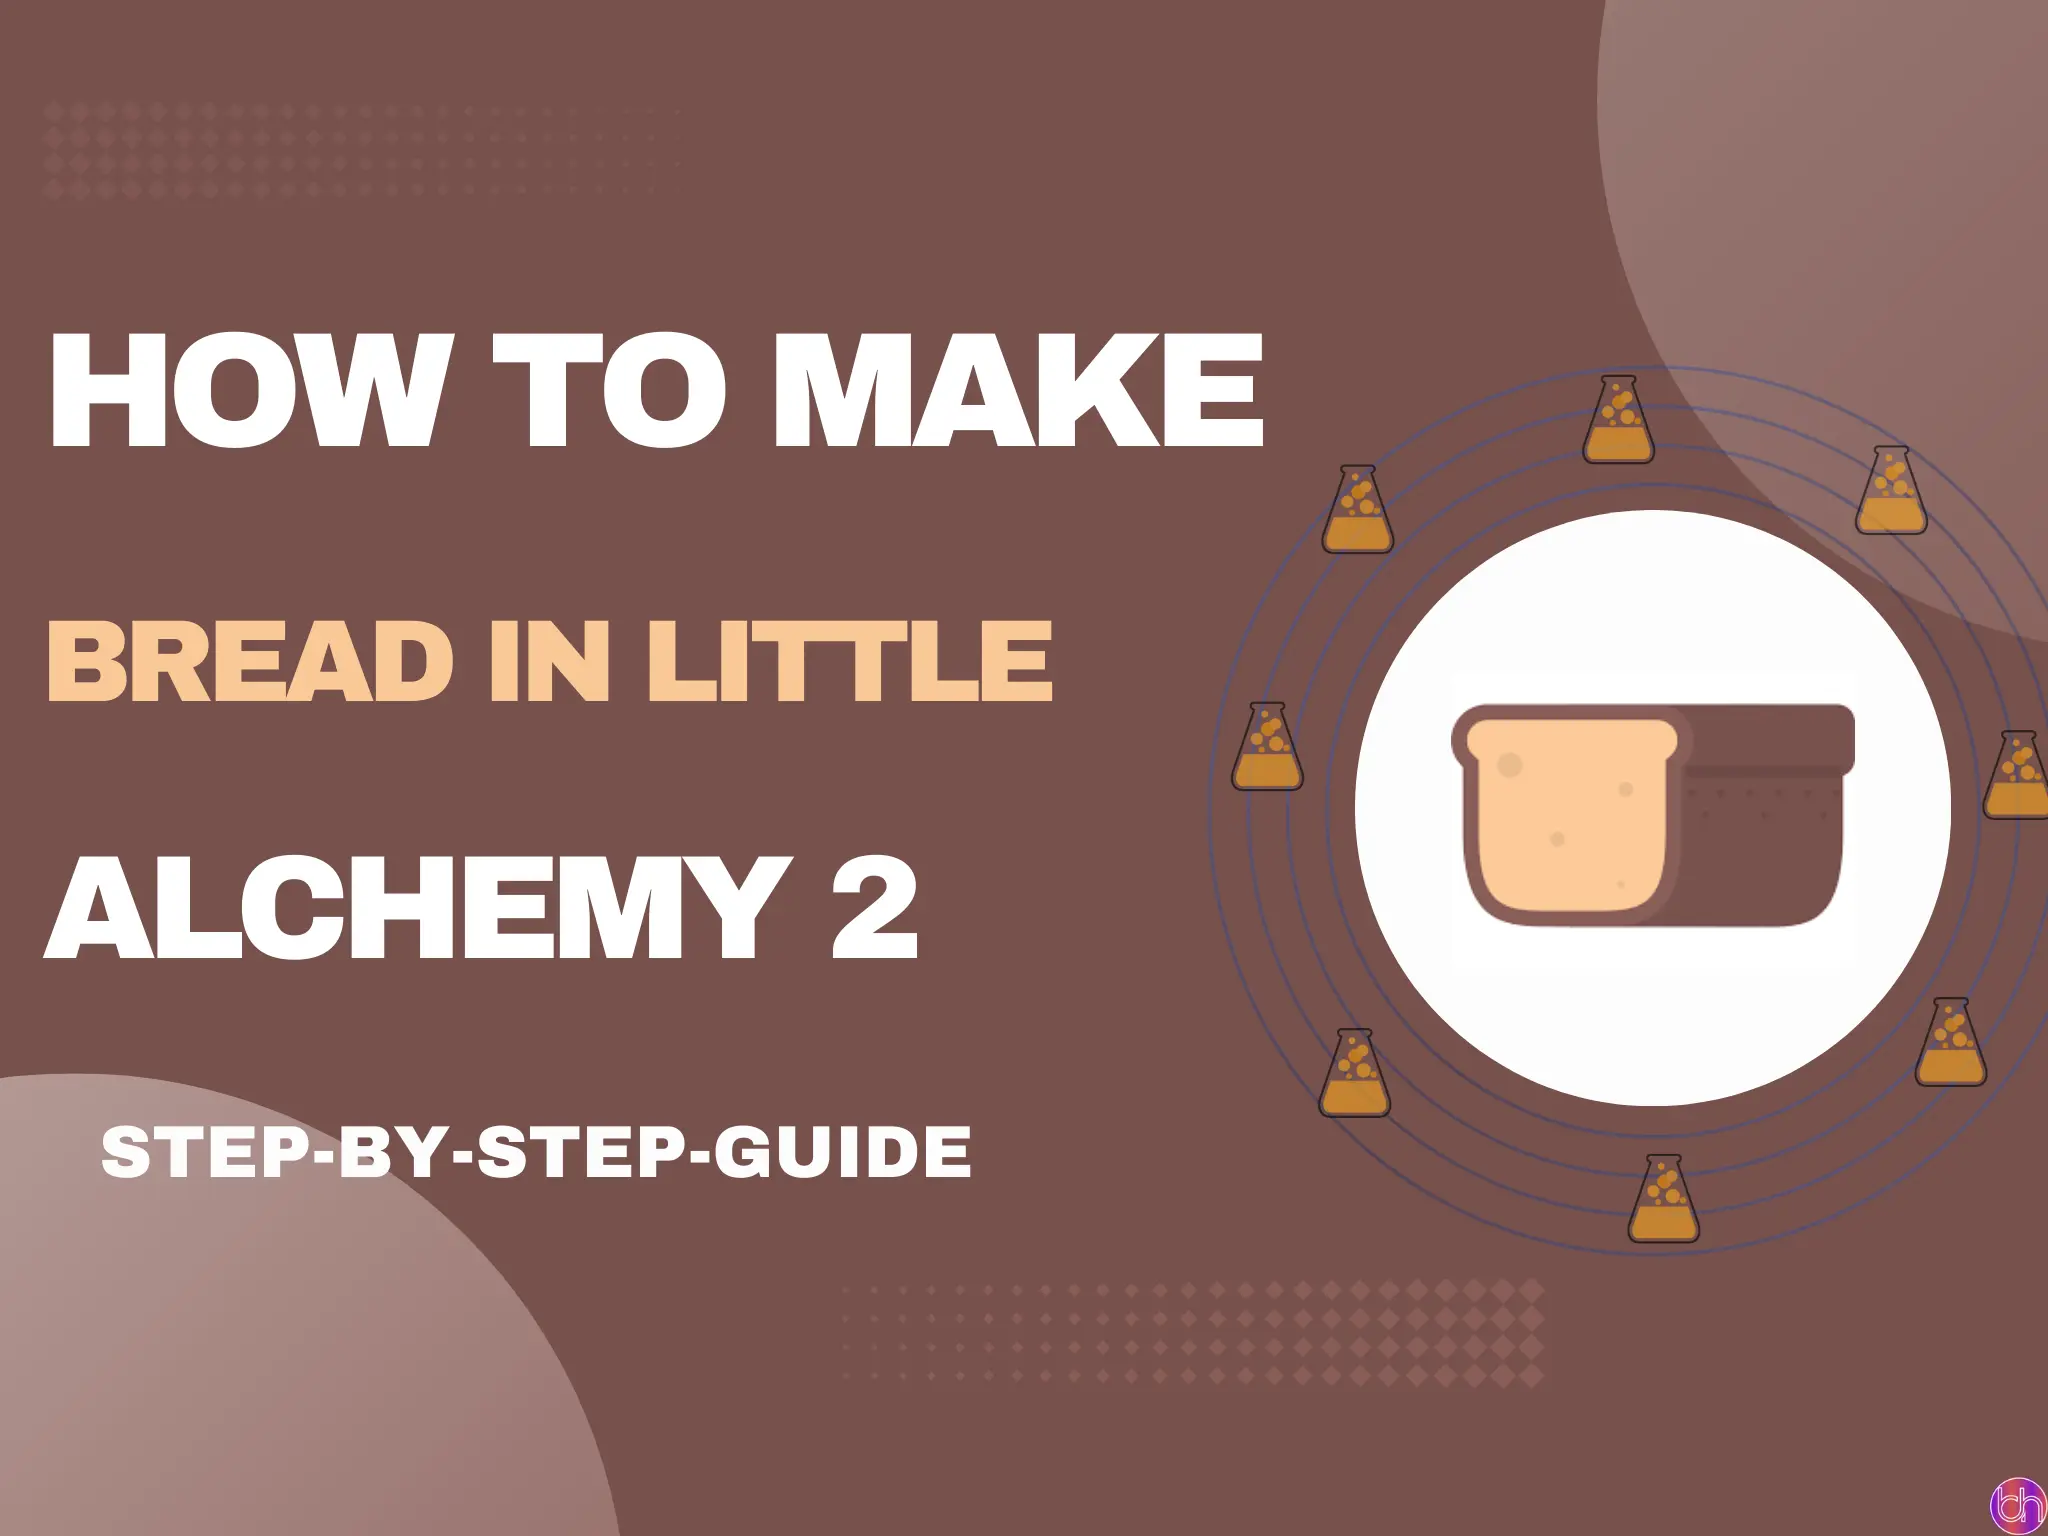 How to make bread in little alchemy 2